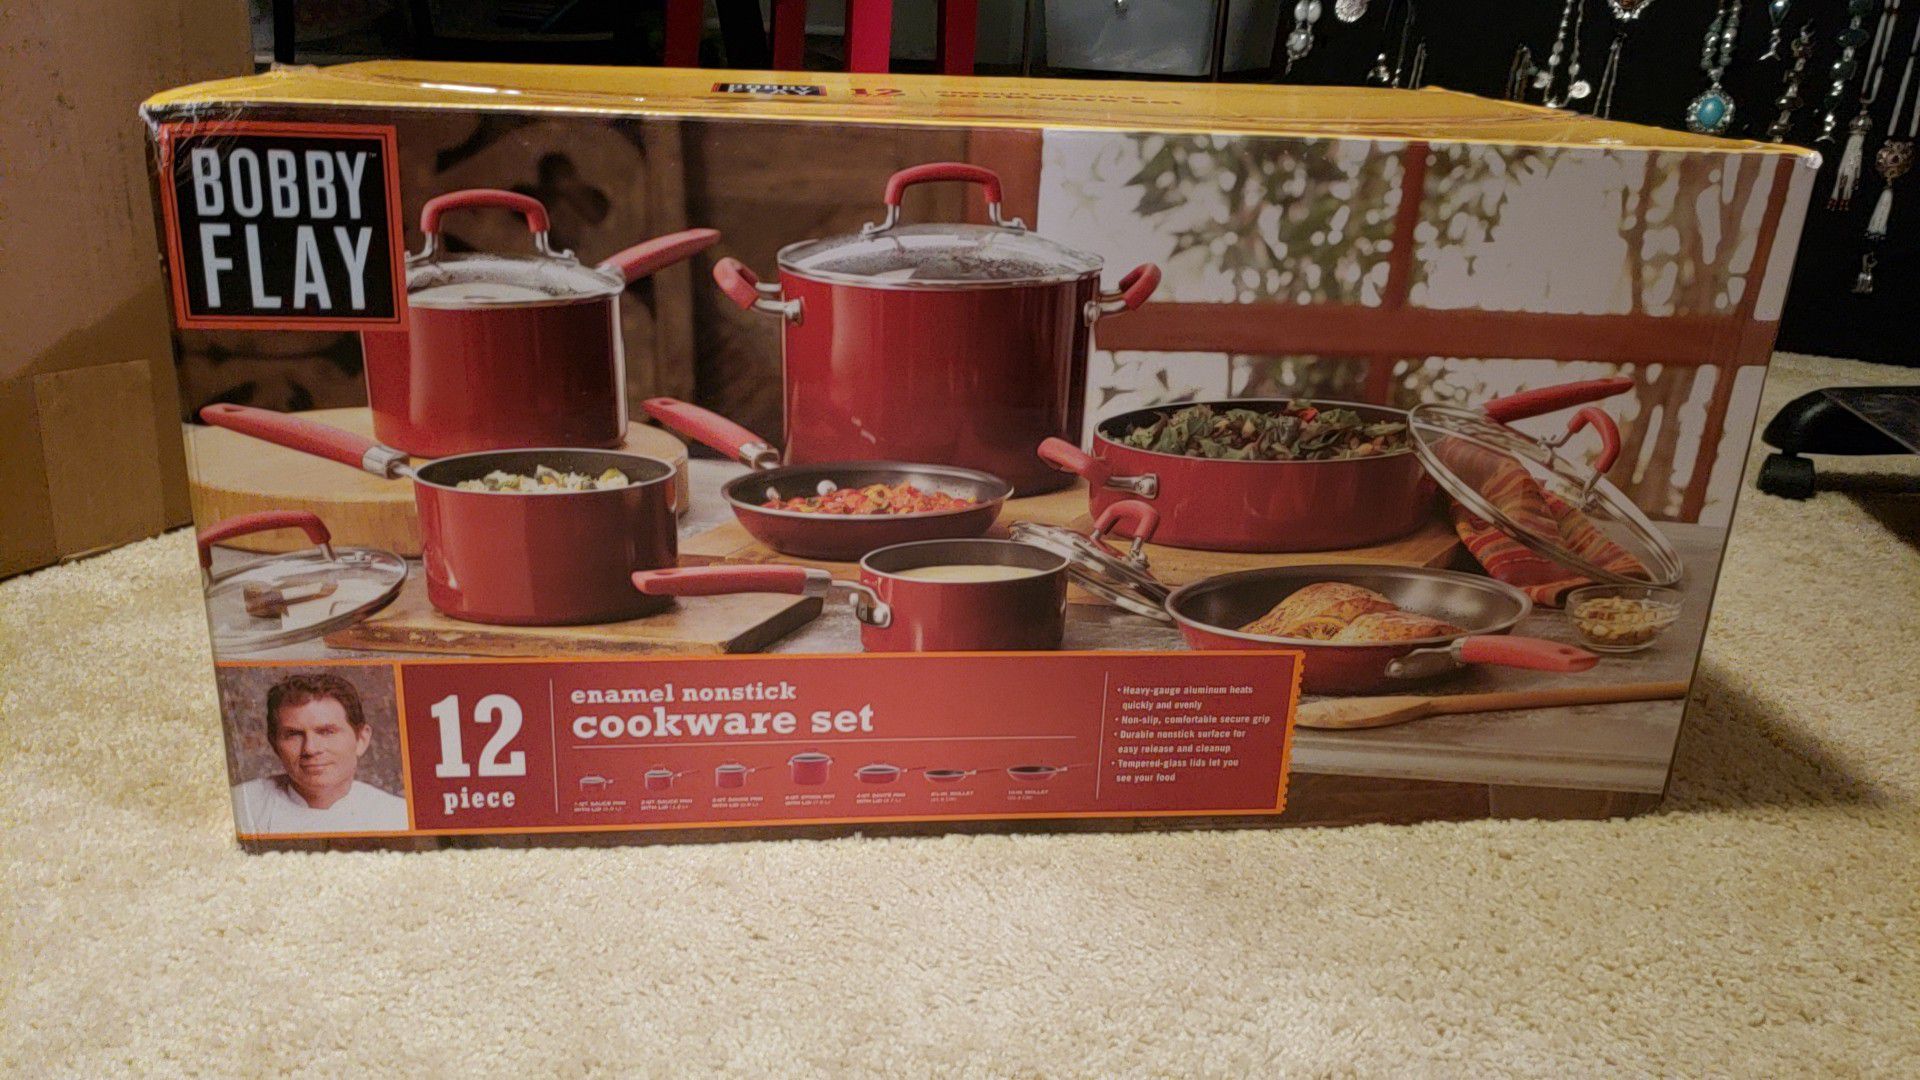 Bobby Flay 12 piece cookware set for Sale in Jacksonville, AR - OfferUp